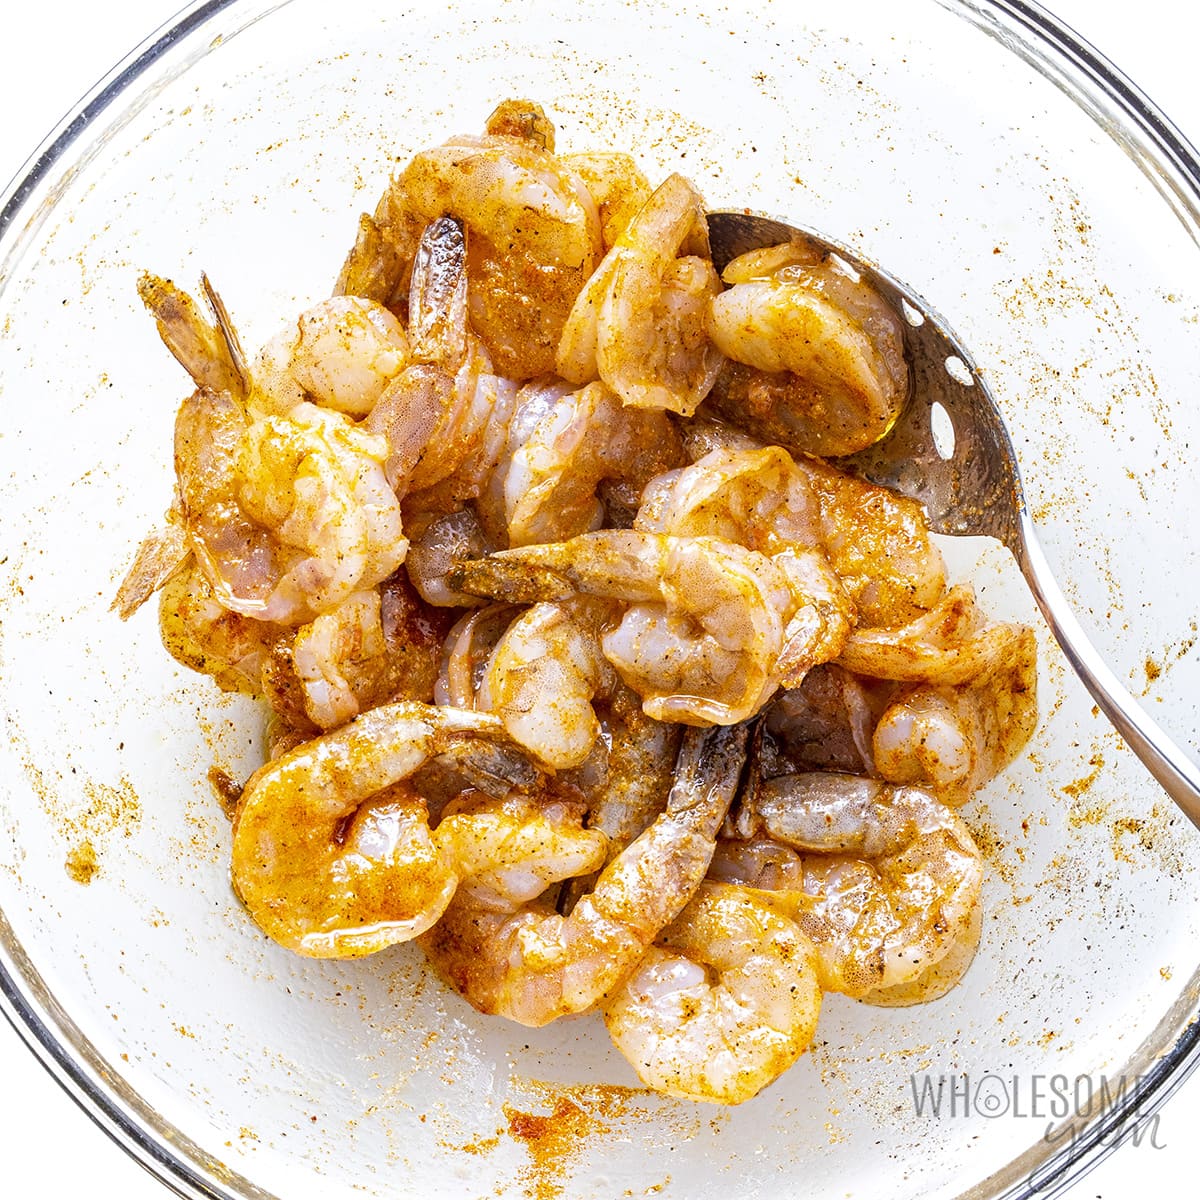 Raw shrimp tossed with seasonings in a bowl.